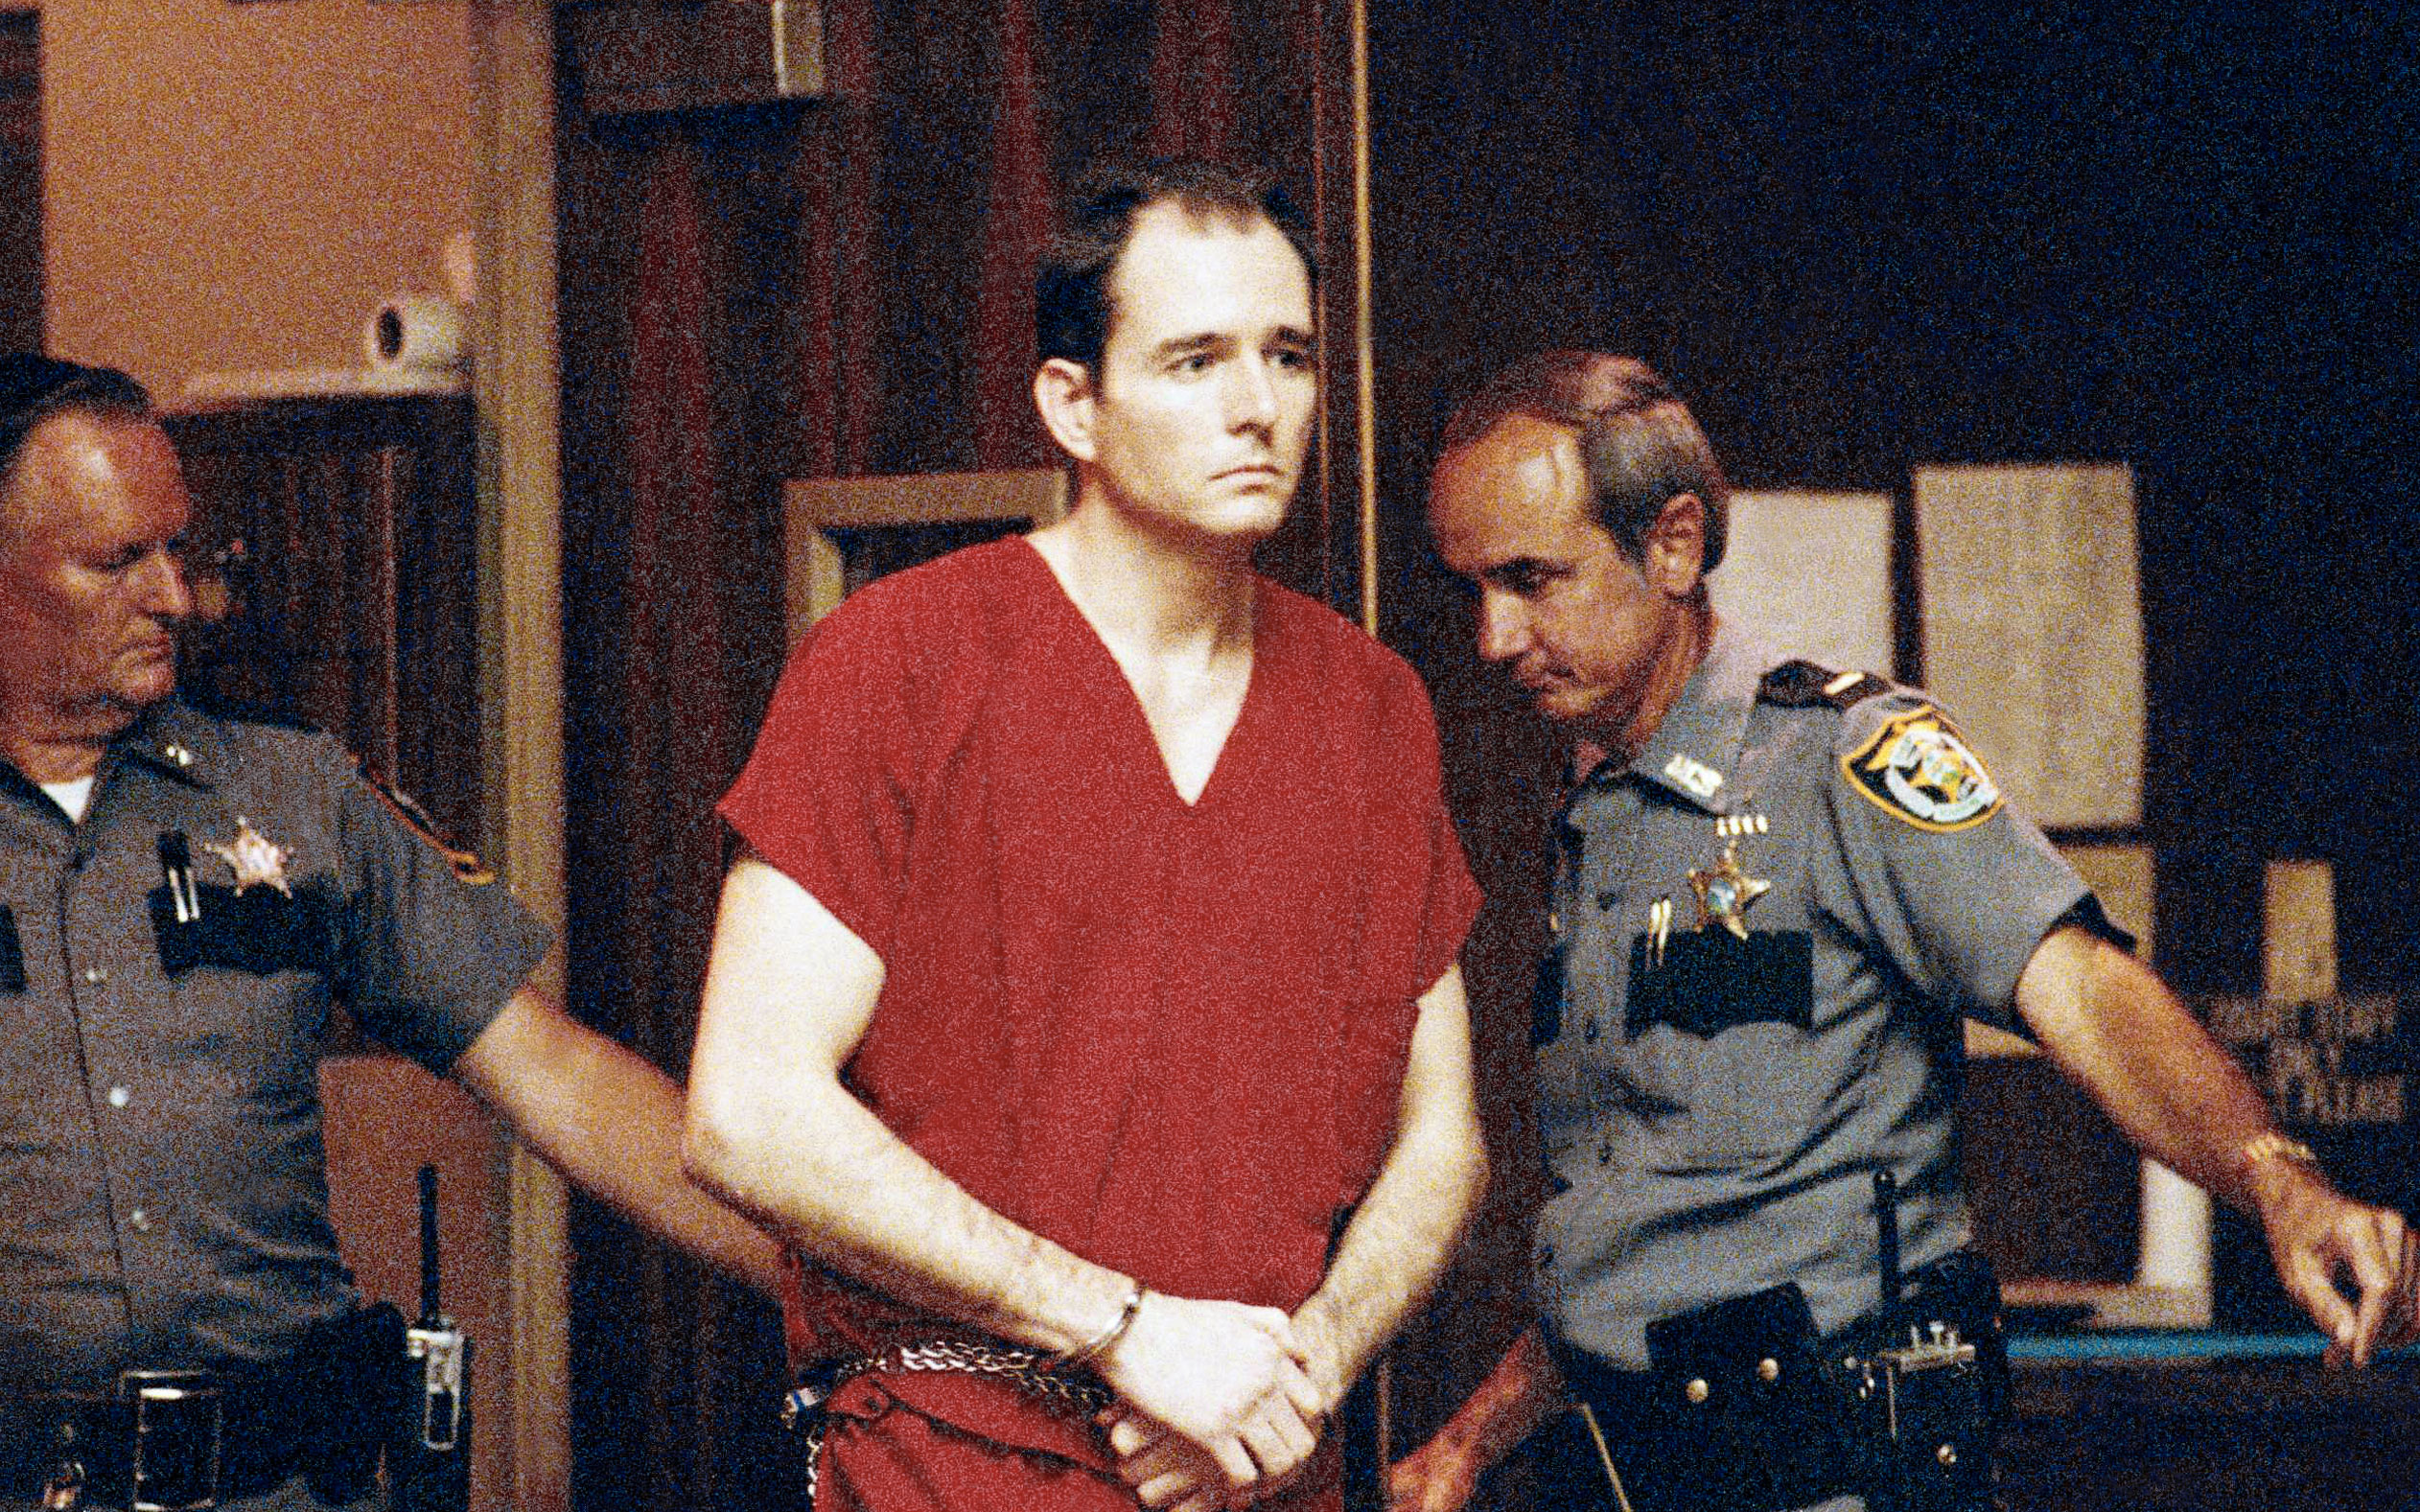 The Twisted Tale Of Gainesville Ripper Killer Danny Rolling Crime News